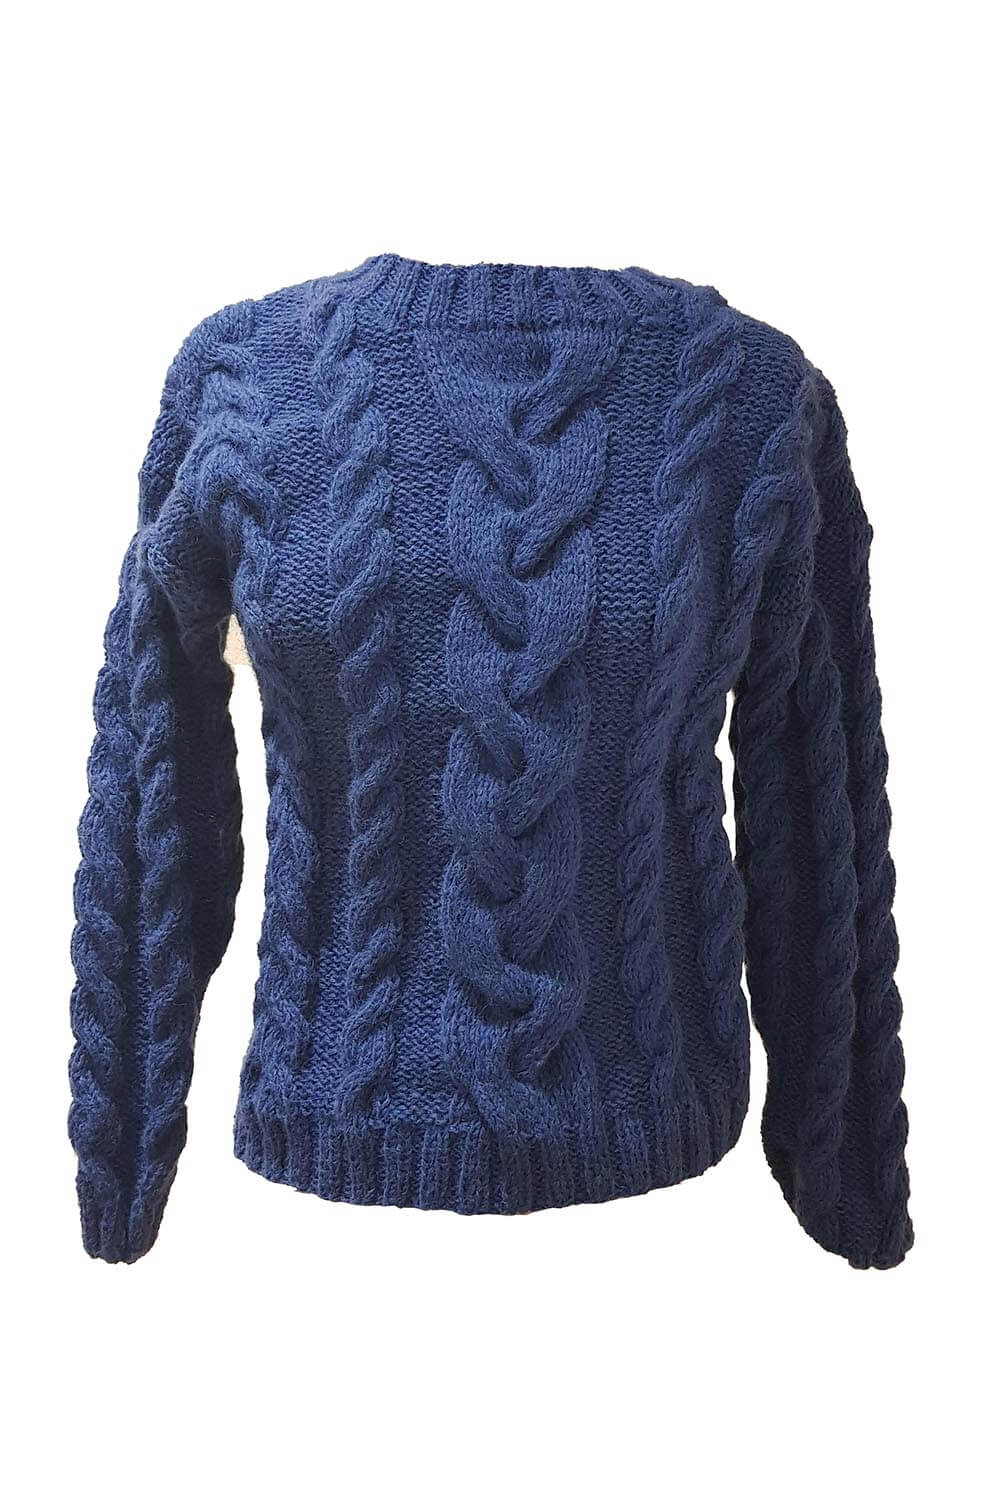 royal blue thick hand knitted sweater in a soft alpaca merino blend ALENA | made to order